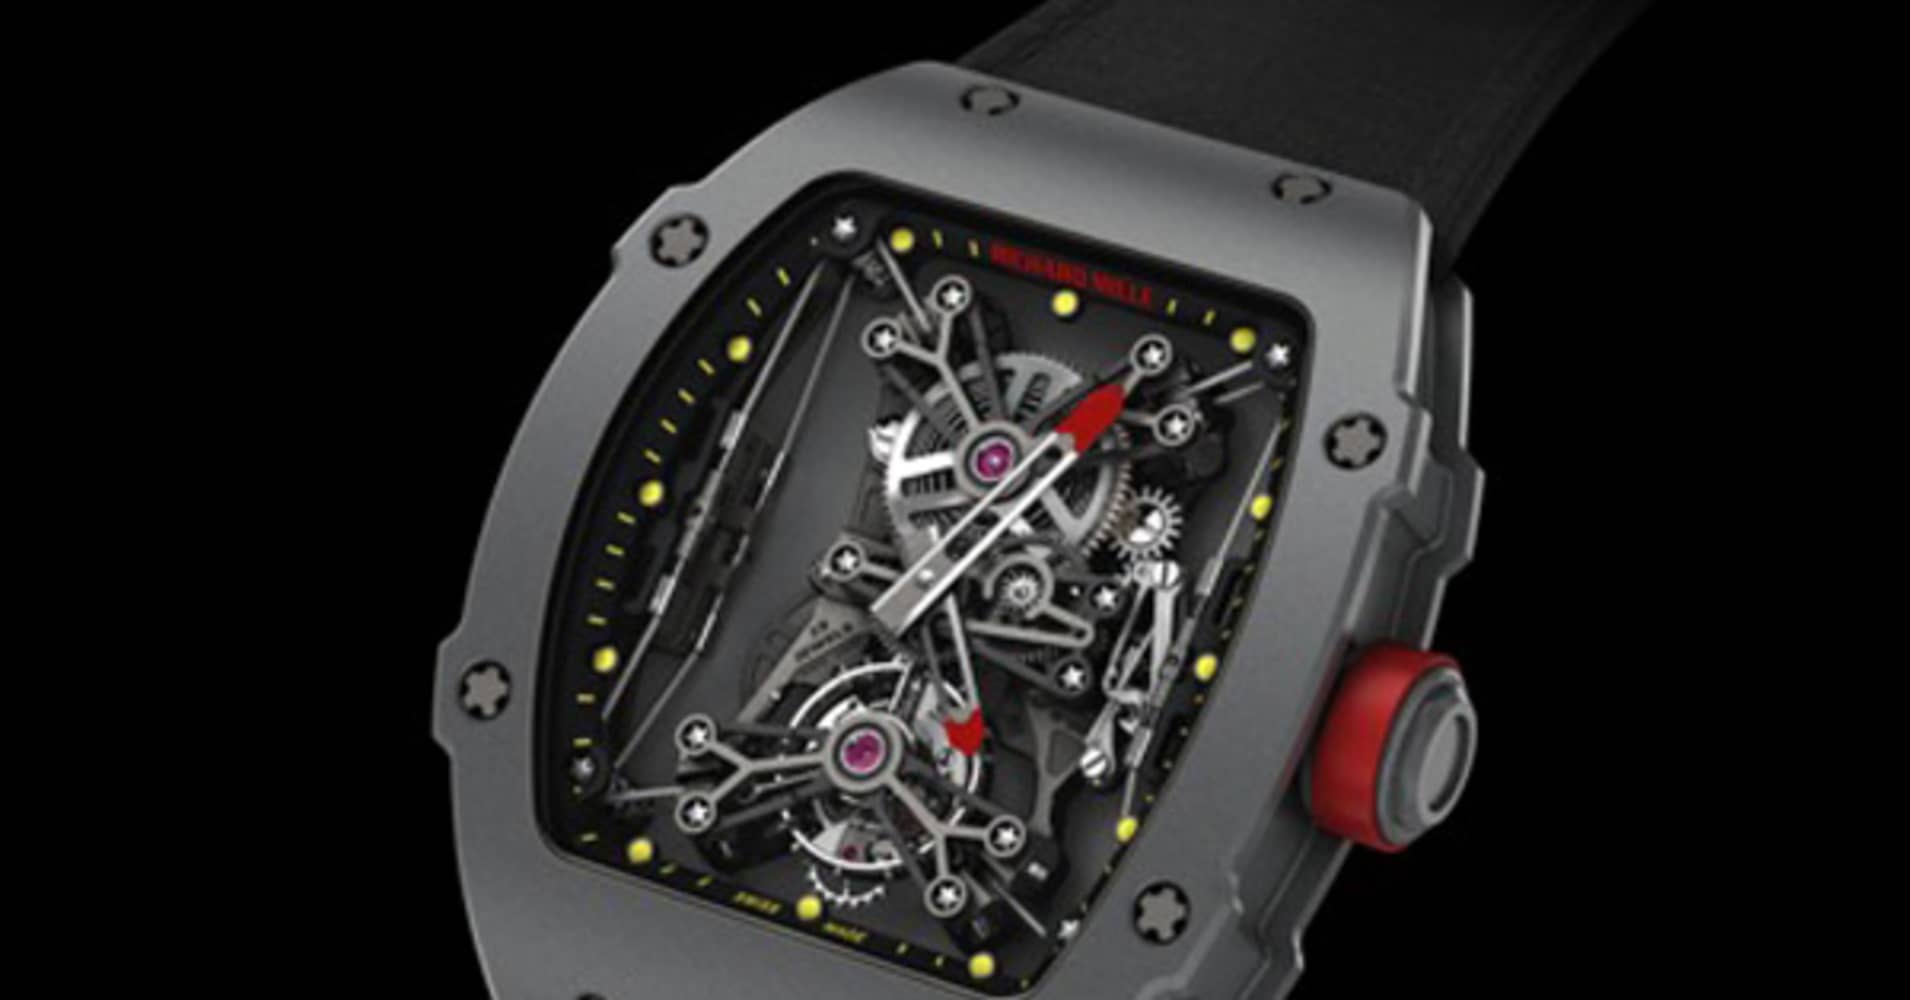 Rafael Nadal's $690,000 watch is now part of his game